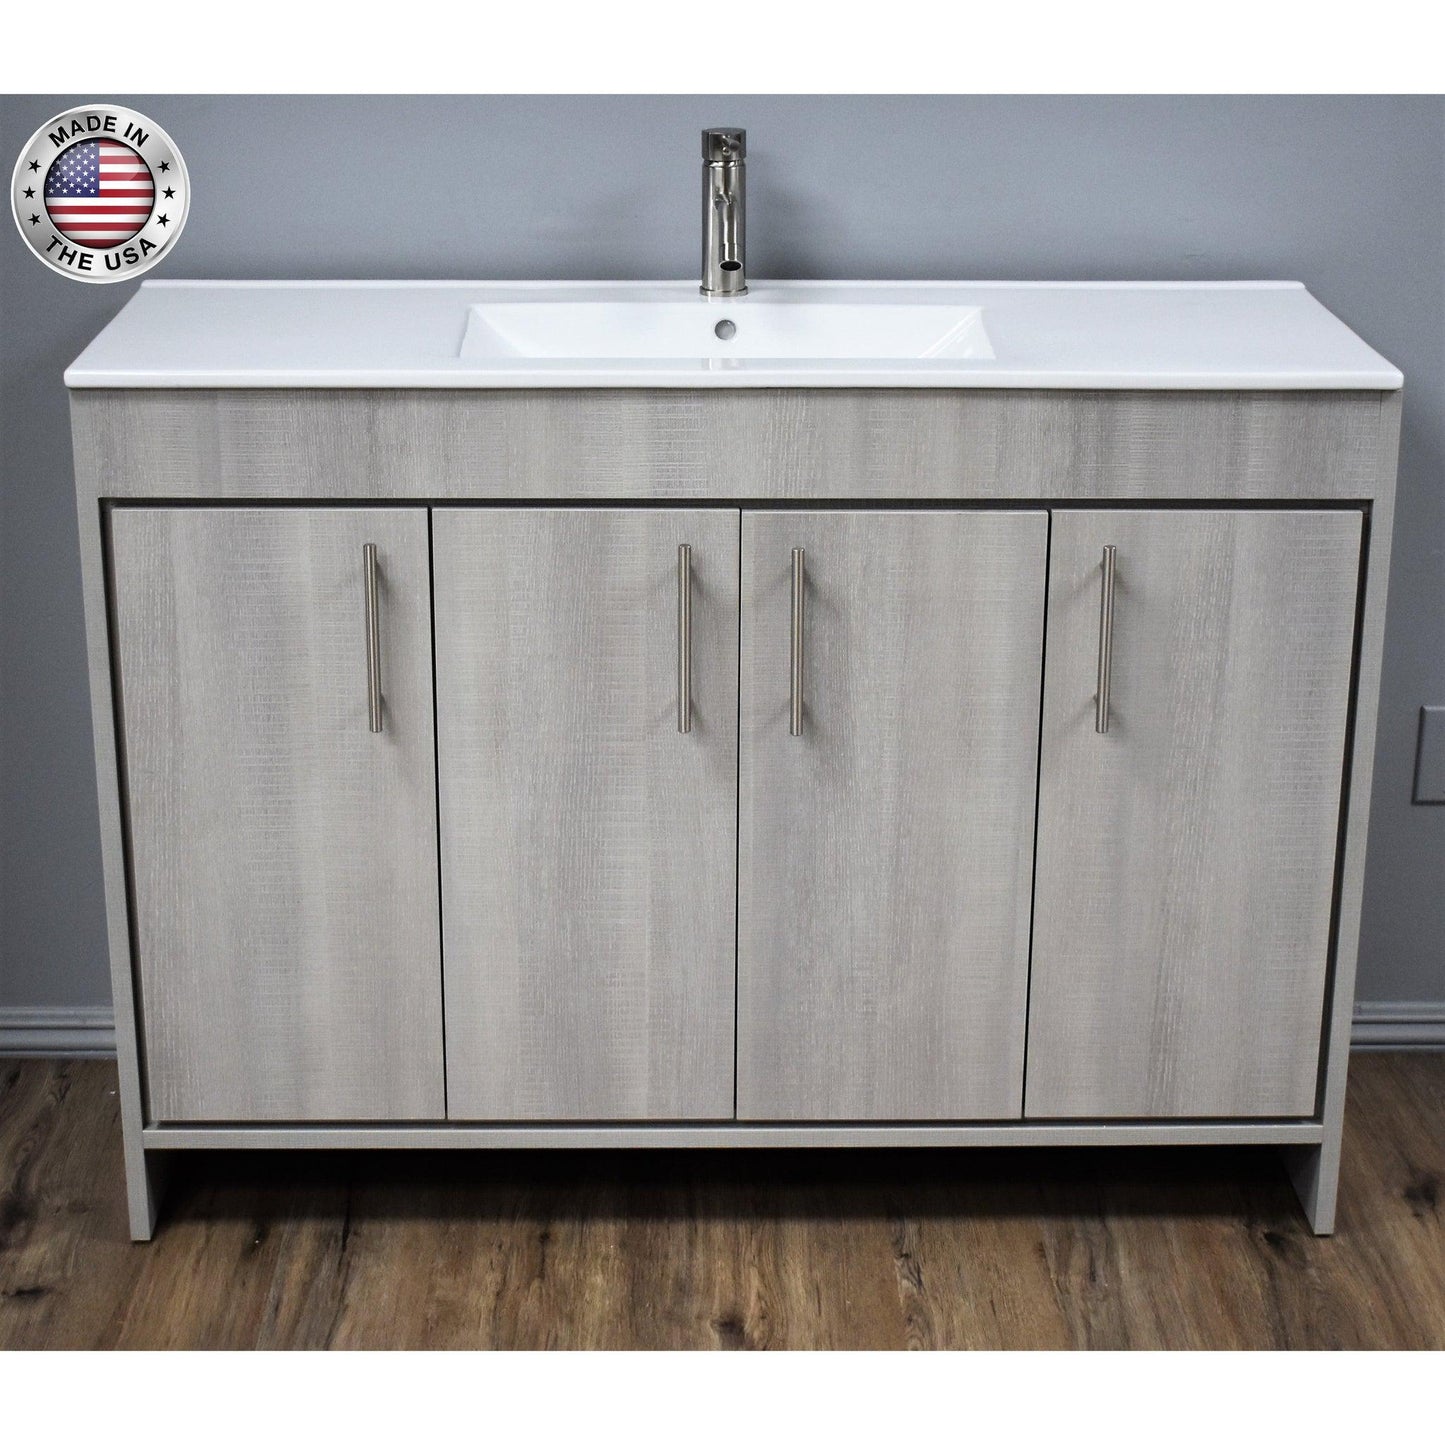 Volpa USA Villa 48" Weathered Grey Freestanding Modern Bathroom Vanity With Integrated Ceramic Top and Brushed Nickel Round Handles